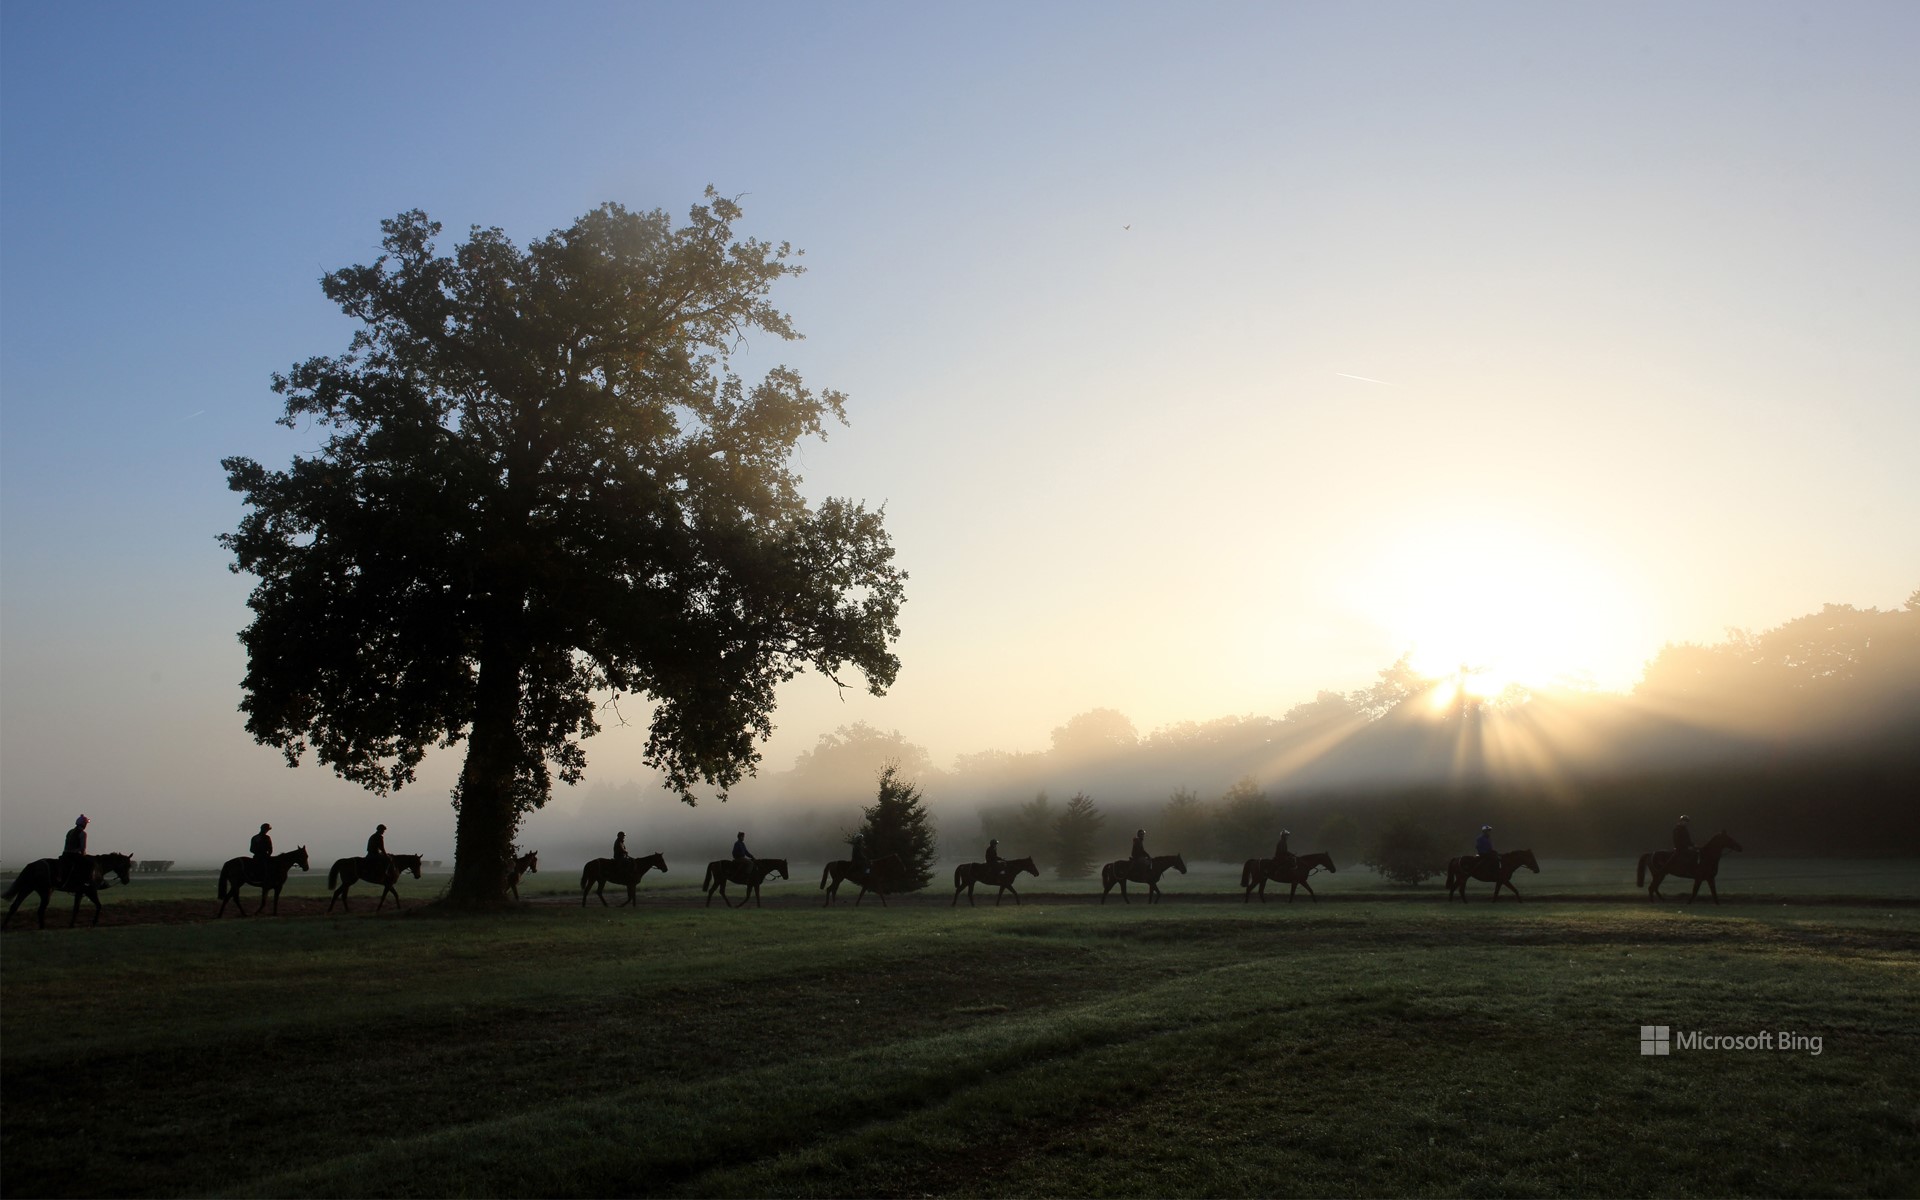 Riders and their horses in the early morning, Chantilly, France